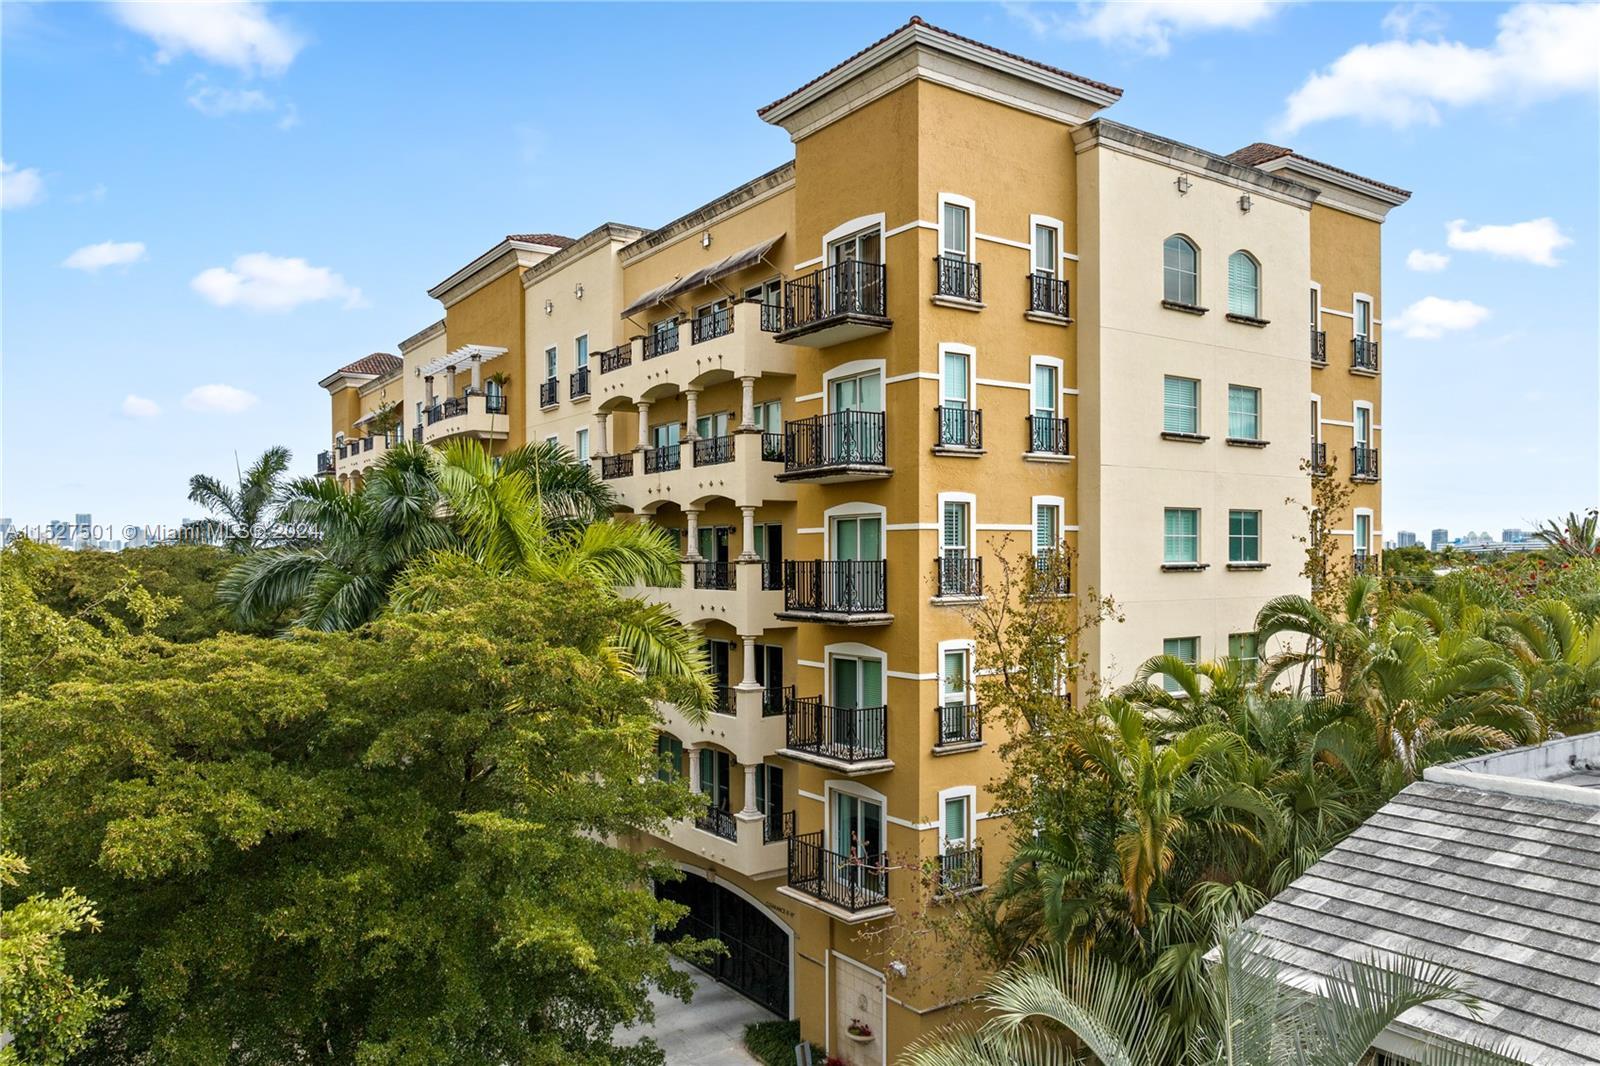 Photo of 20 Calabria Ave #300 in Coral Gables, FL